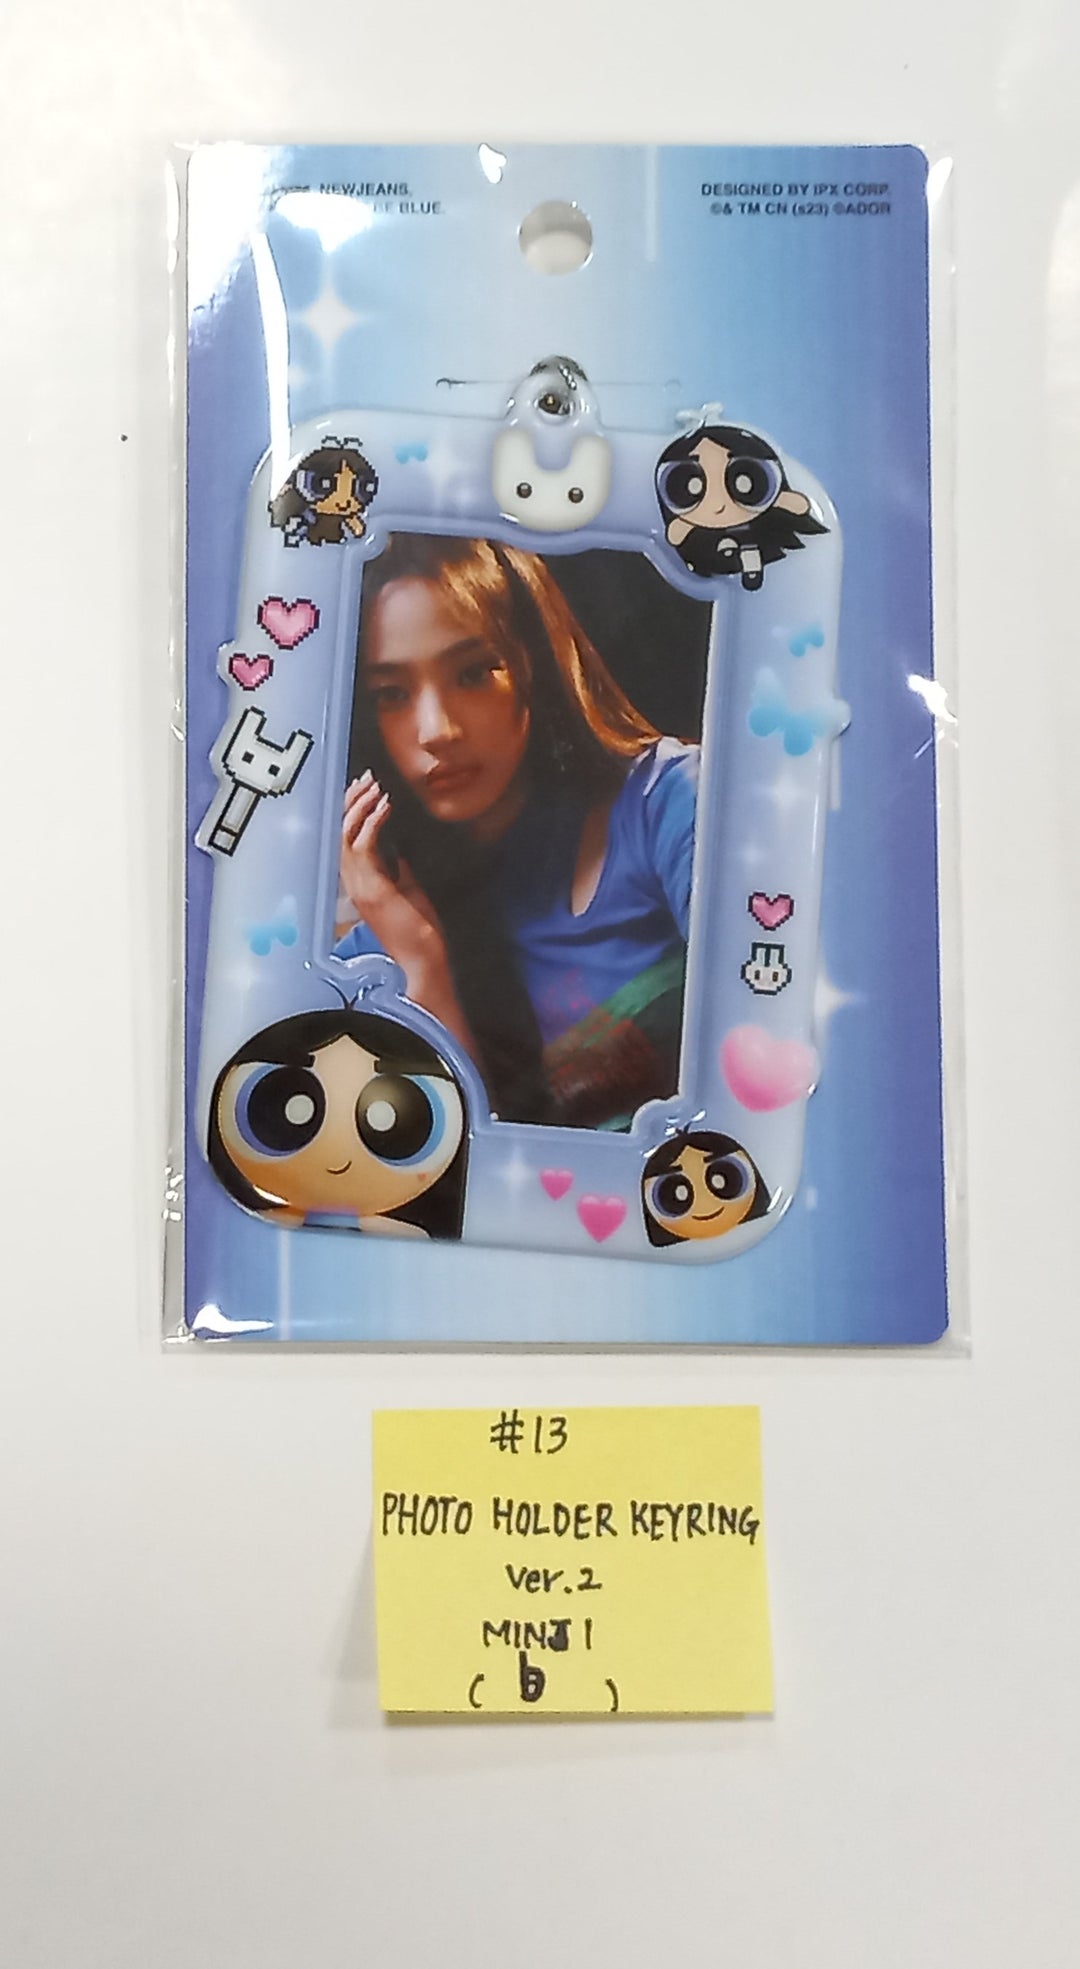 New Jeans - New Jeans x Line Friends Pop-Up Store Official MD [Acrylic Magnetic, Pin Badge, Photo Holder Keyring, Mouse Pad, Plastic File] [24.1.24]